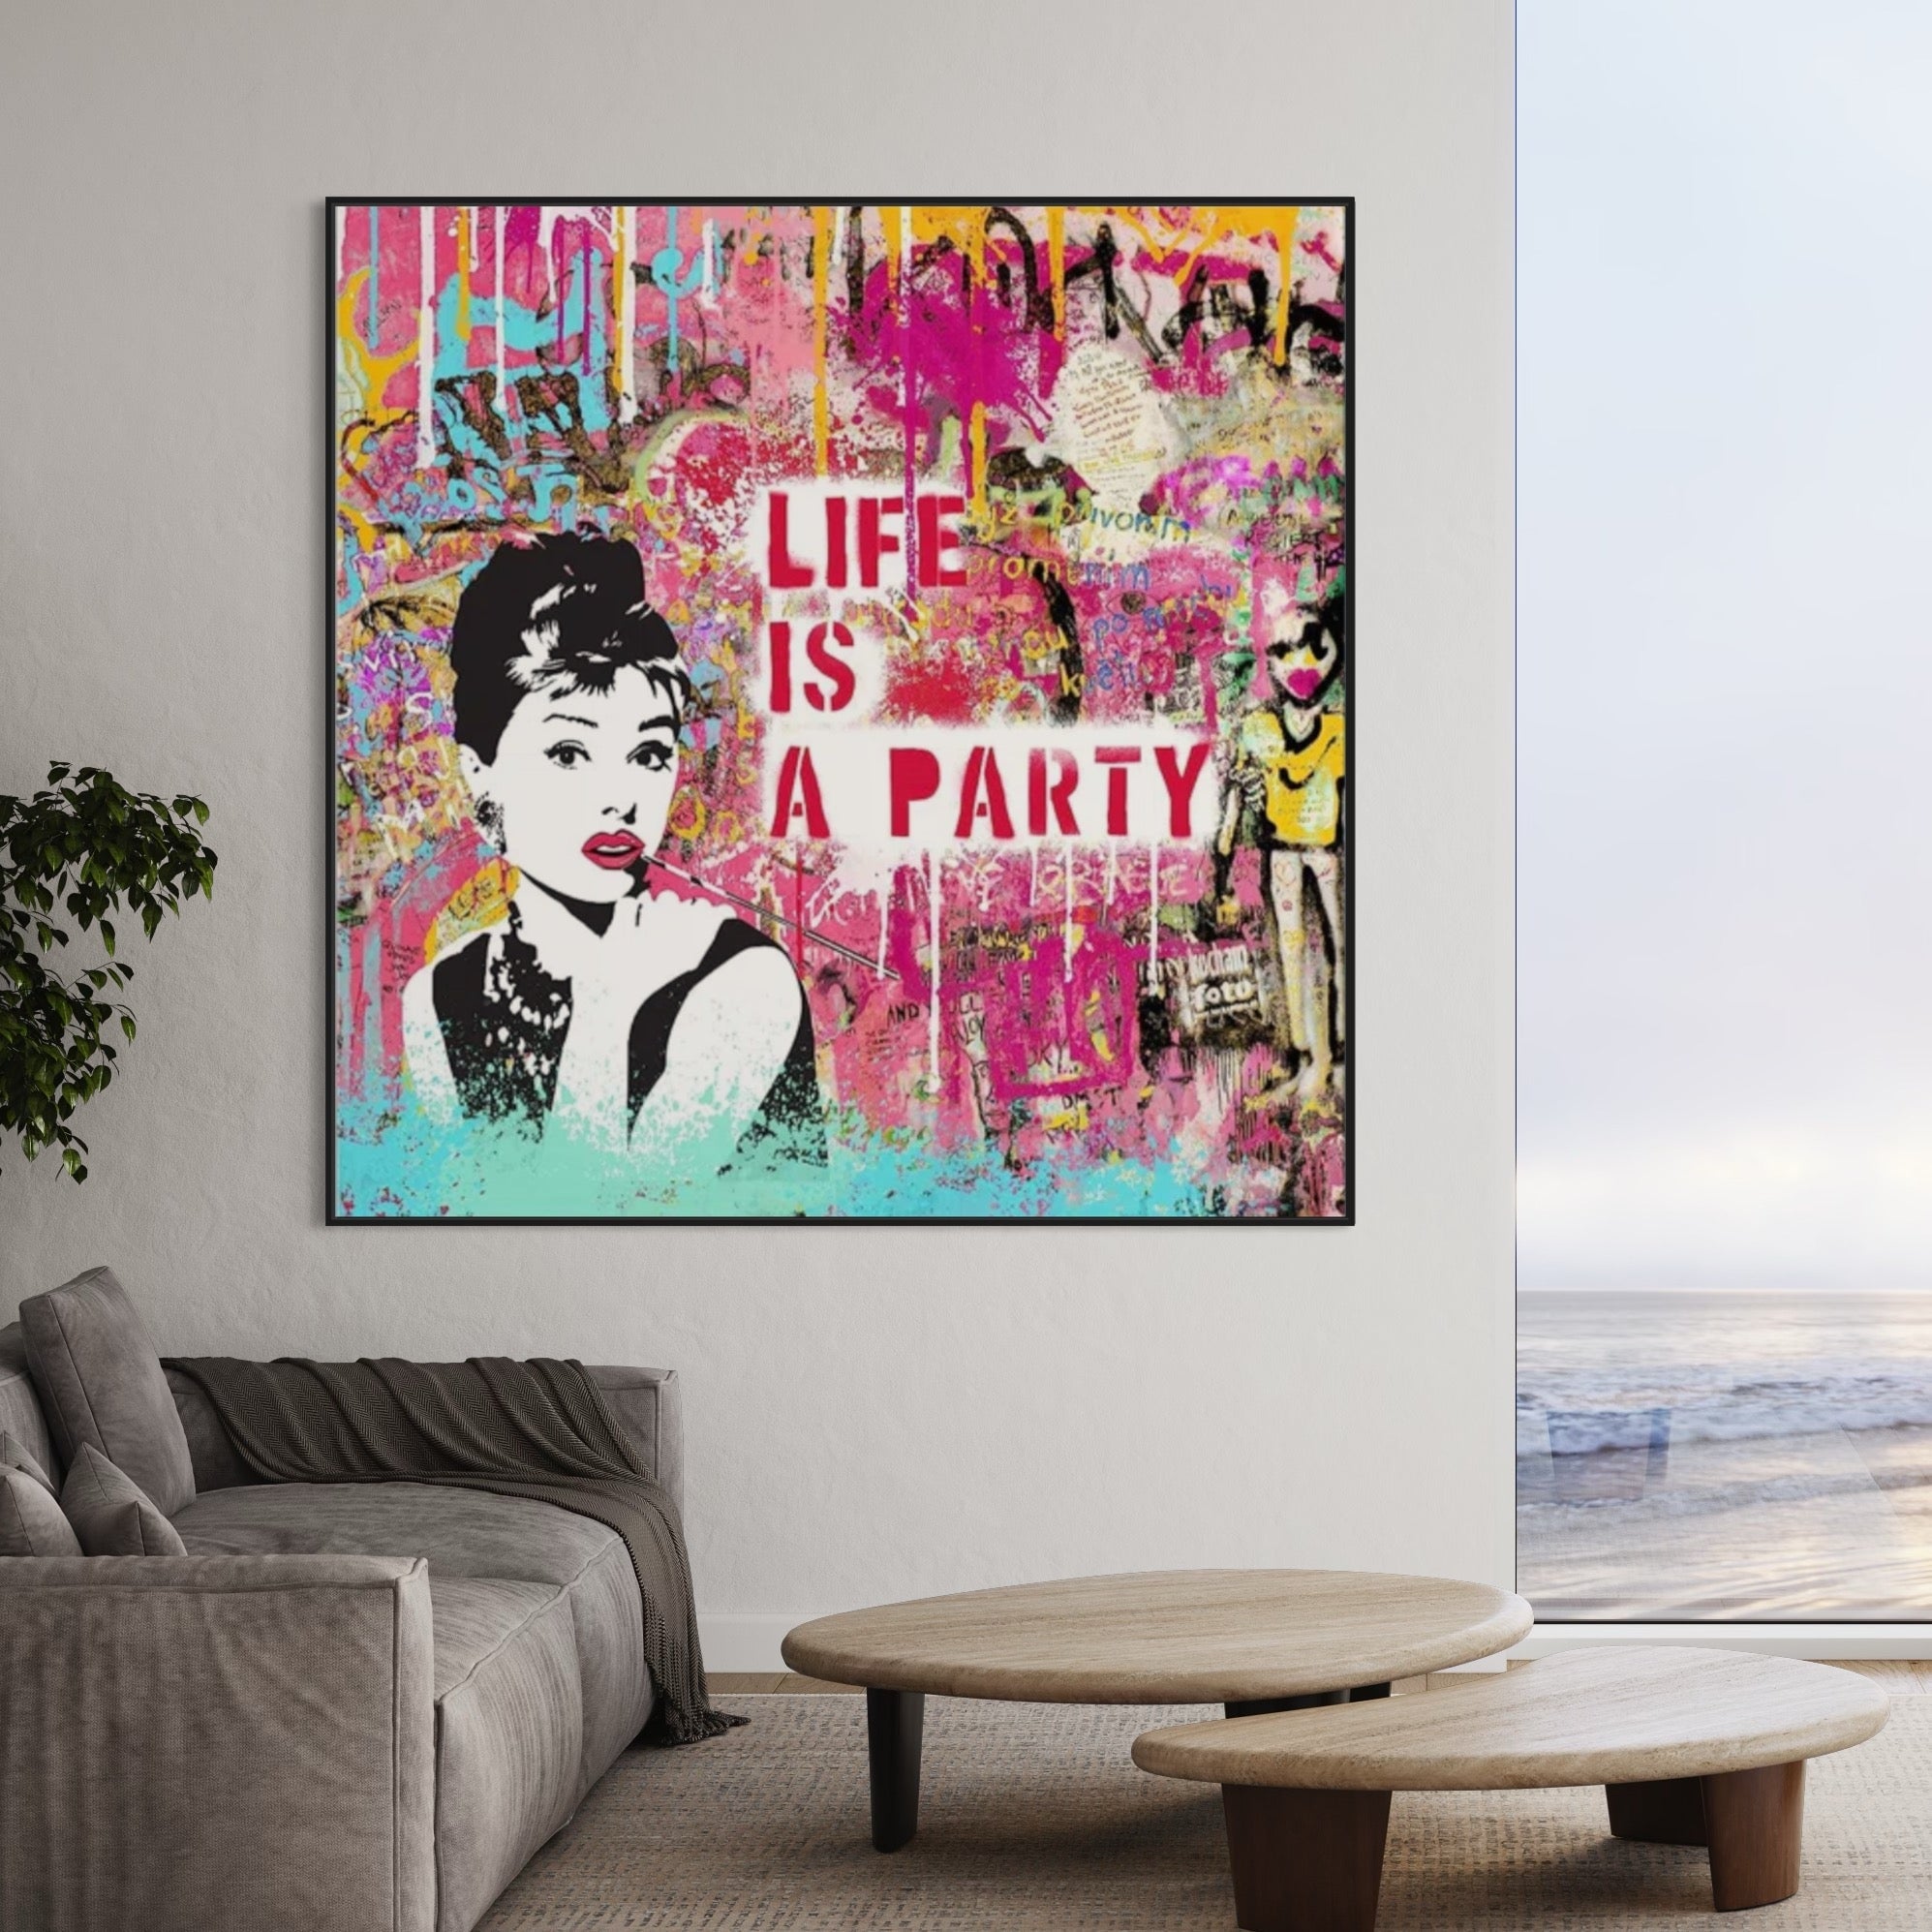 "Life is a Party" Graffiti Art